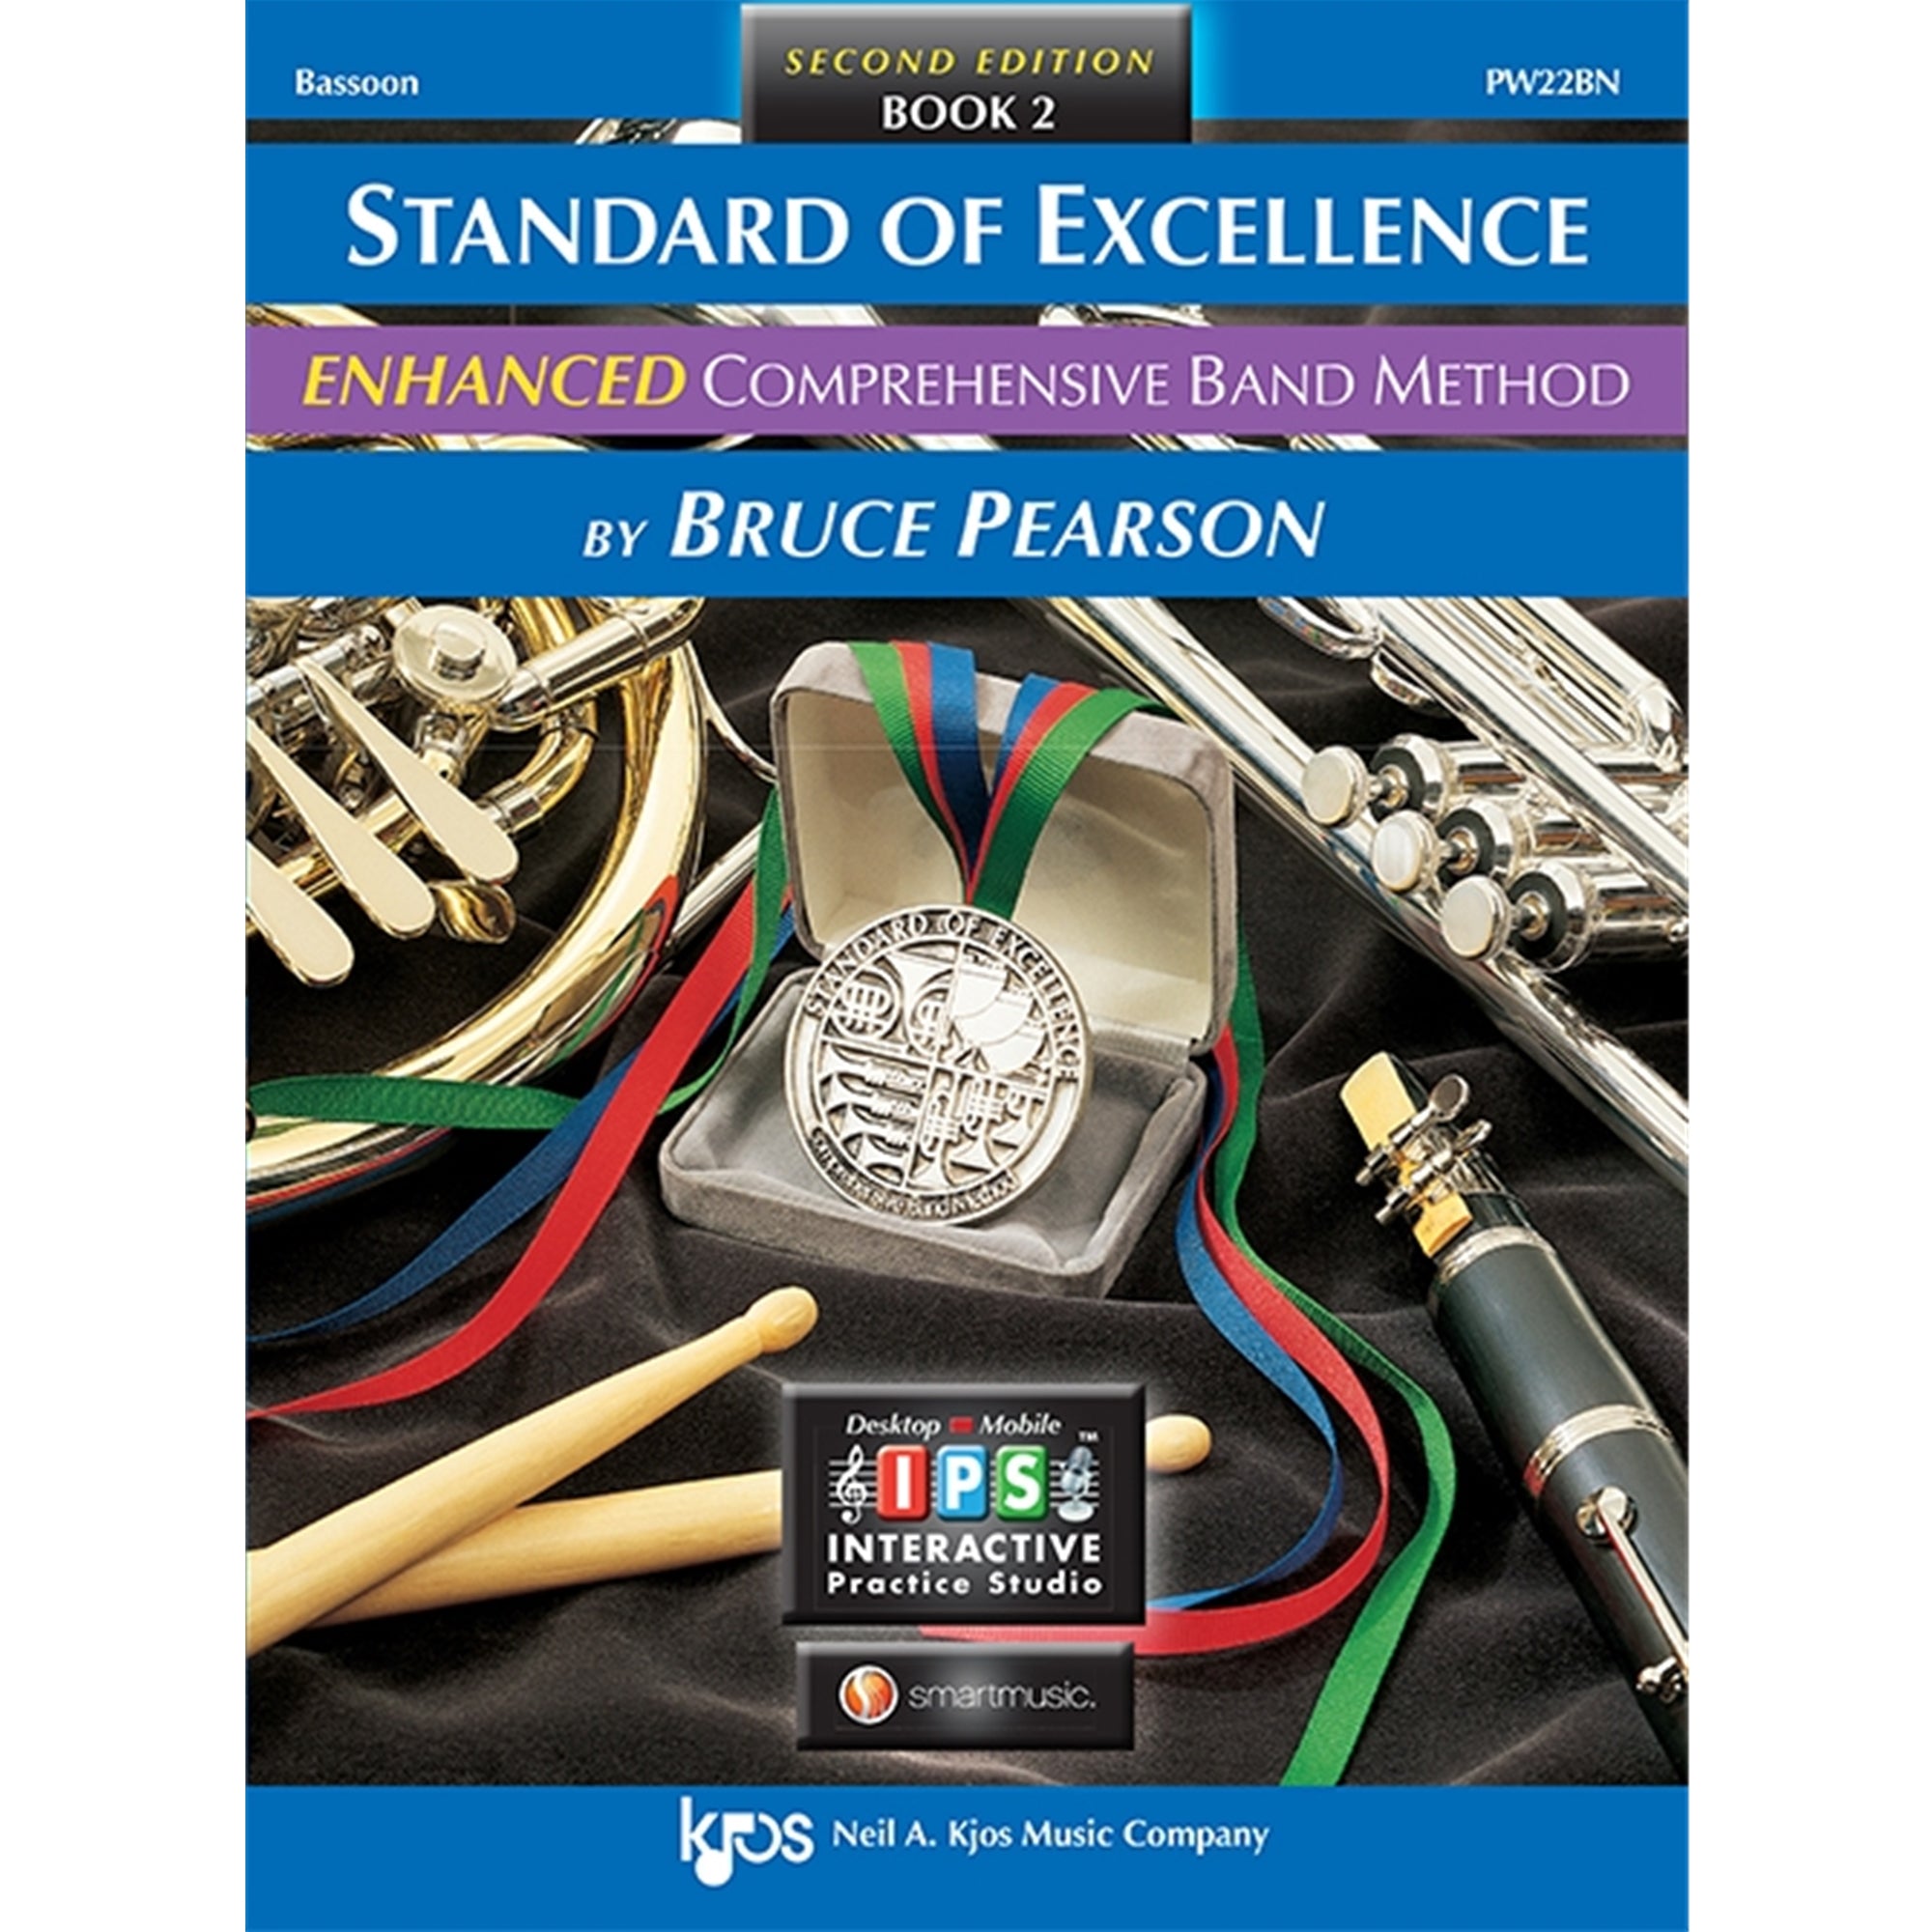 KJOS PW22BN Standard of Excellence Book 2 Bassoon